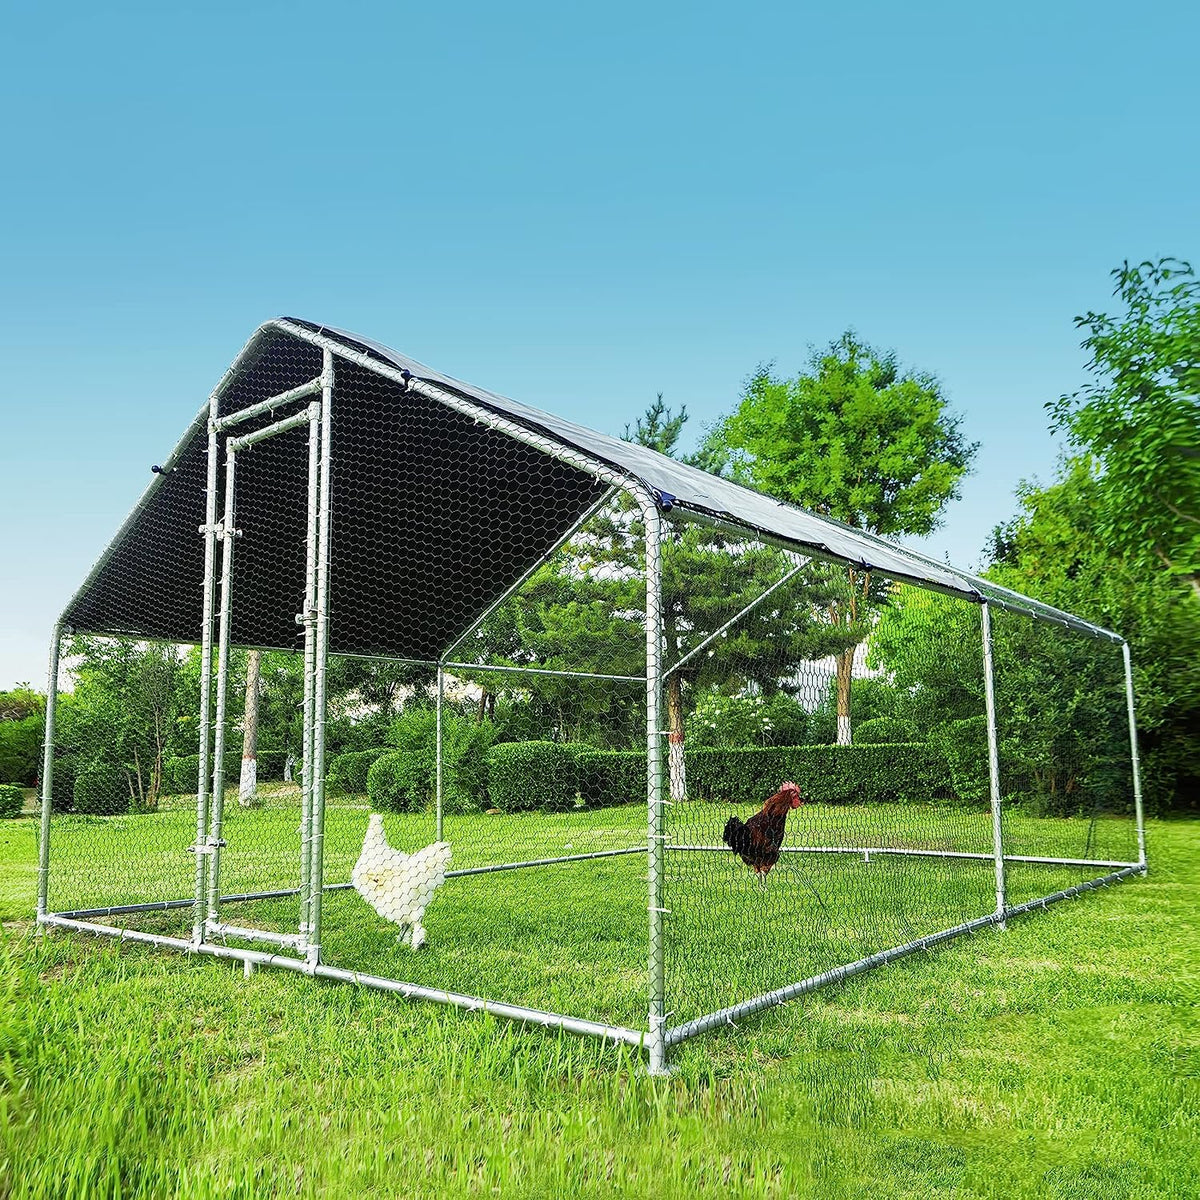 HITTITE Large Metal Chicken Coop Run for 6/8/10 Chickens,Heavy Duty Walk-in Poultry Cage with Cover,Outdoor Hen Rabbit Chicken Run in with Spire Shaped for &amp;Farm Yard（12.8&#39;Lx9.84&#39;Wx6.56&#39;H）